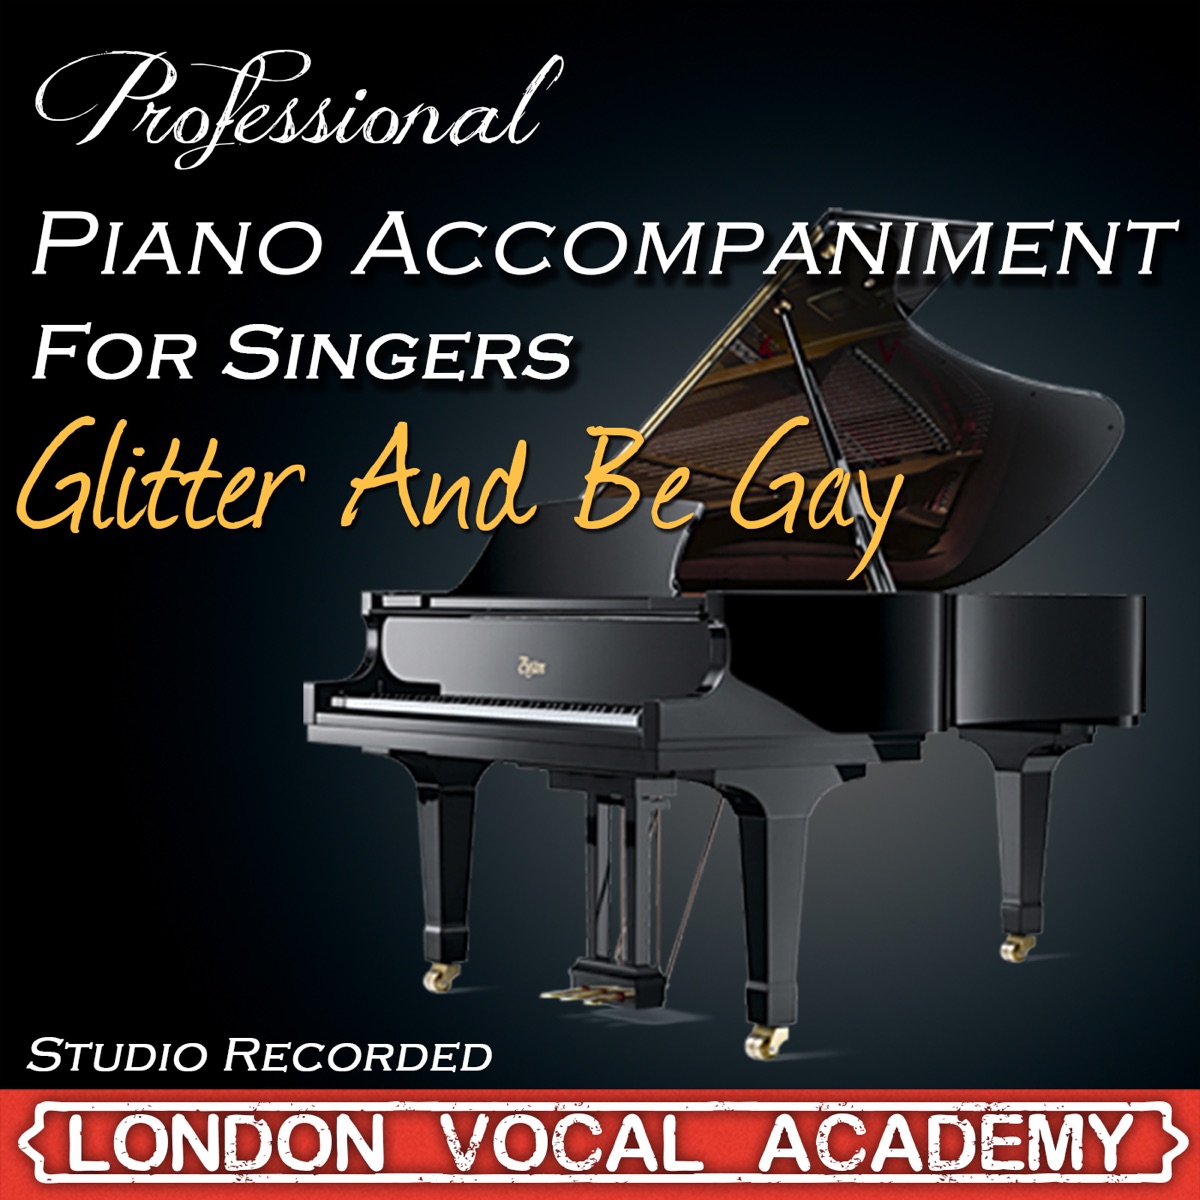 Glitter And Be Gay ('Candide' Piano Accompaniment) [Professional Karaoke  Backing Track] - Single by London Vocal Academy on Apple Music